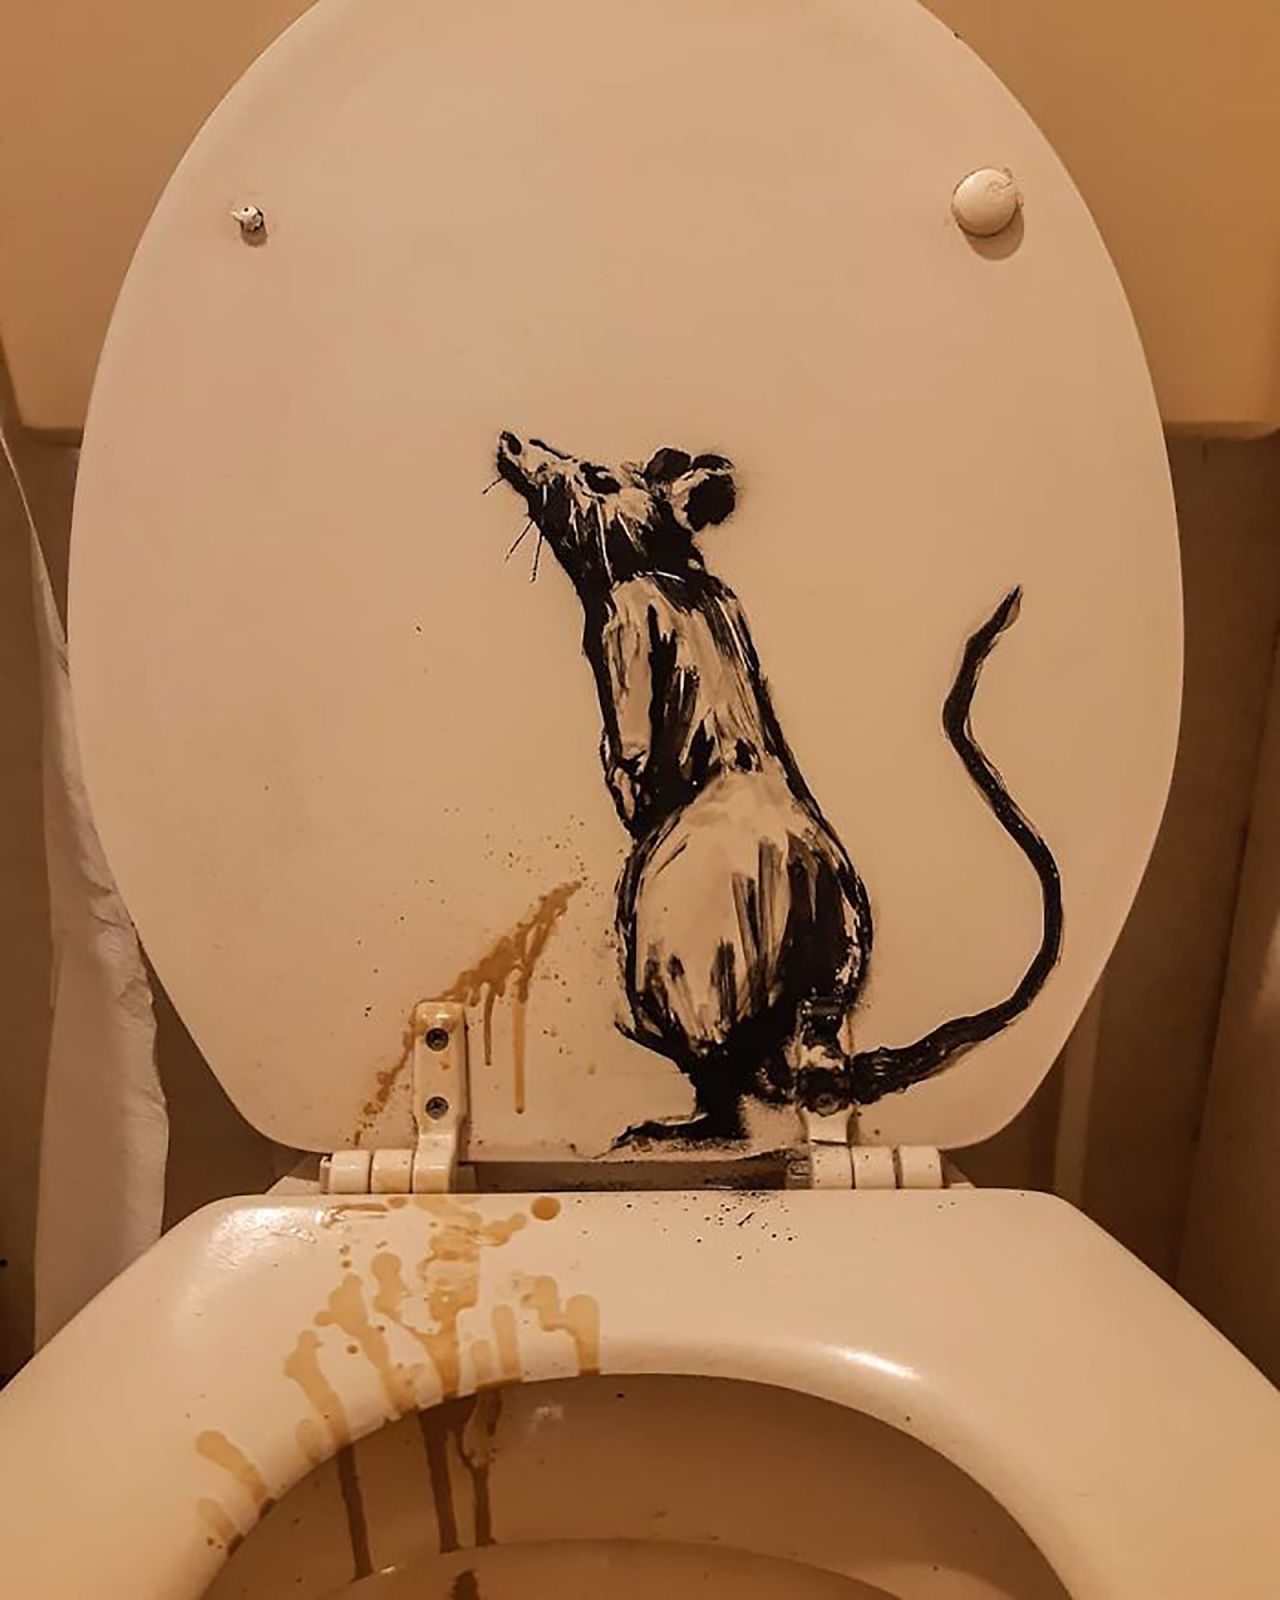 One rat is making full use of the bathroom facilities.